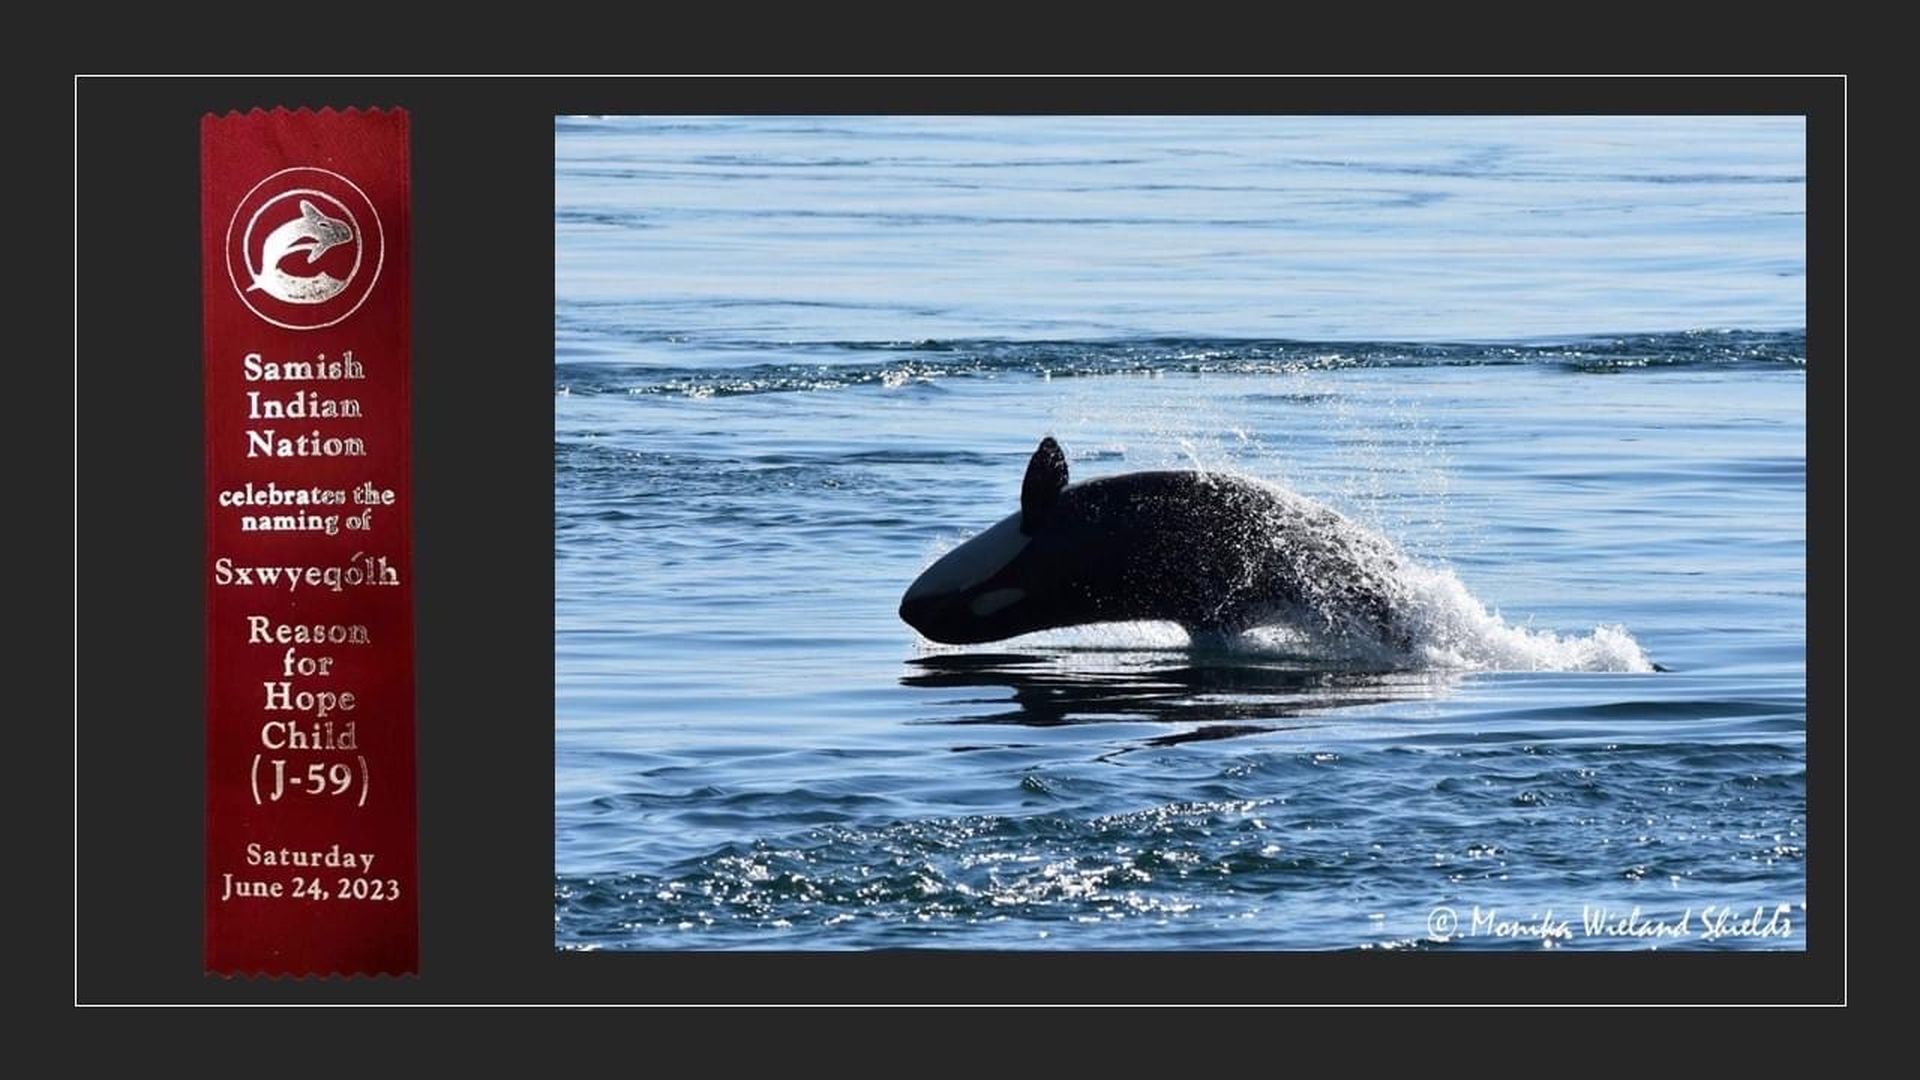 A photo of a whale calf alongside a ribbon commemorating the whale's naming ceremony by the Samish Indian Nation. 